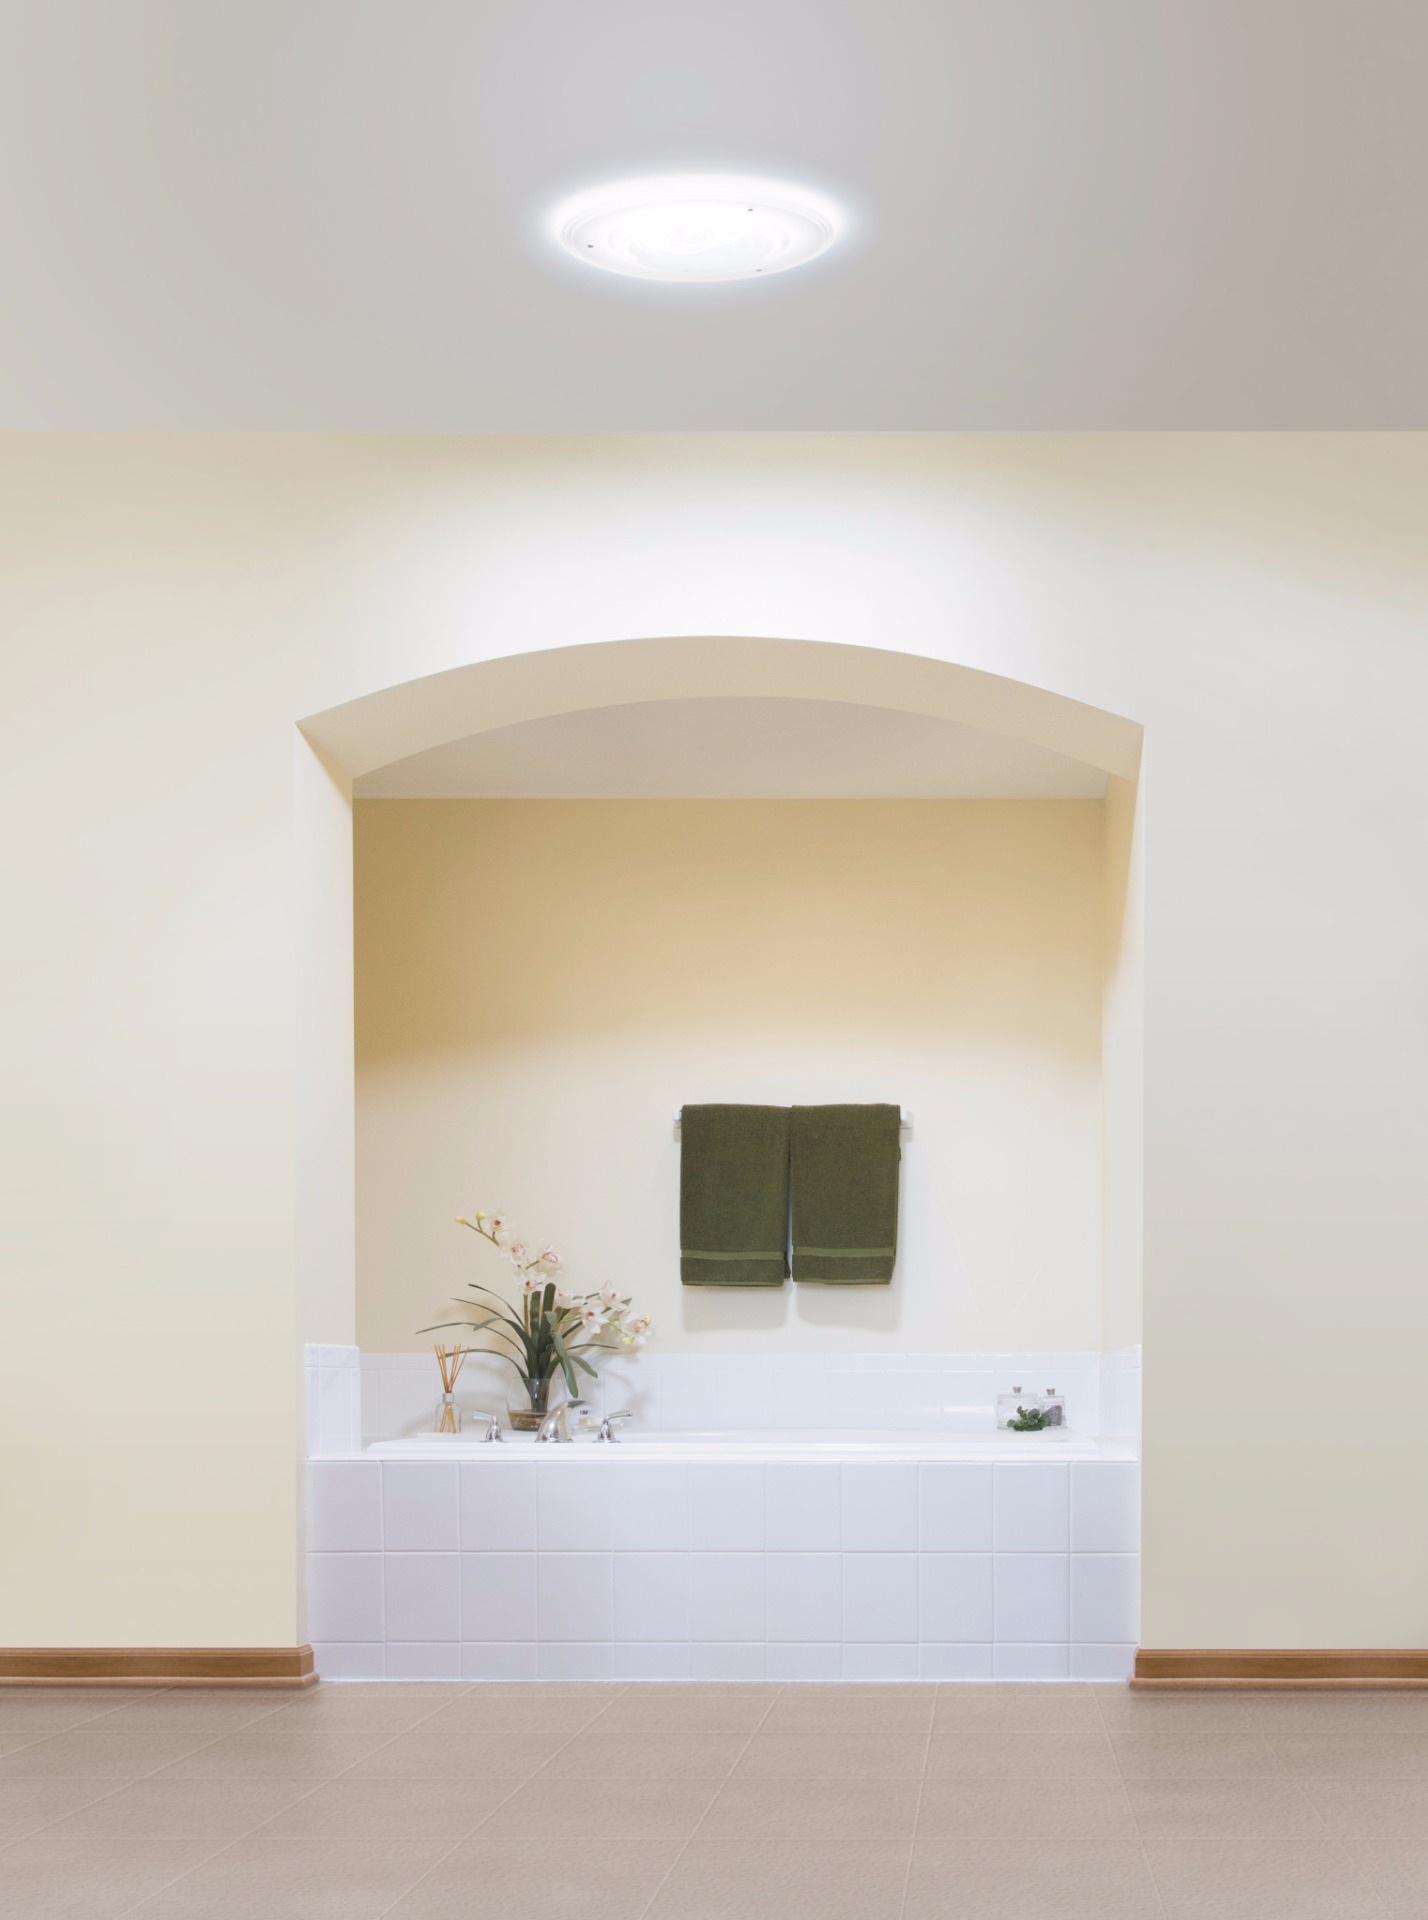 Bathroom example without ventilation kit